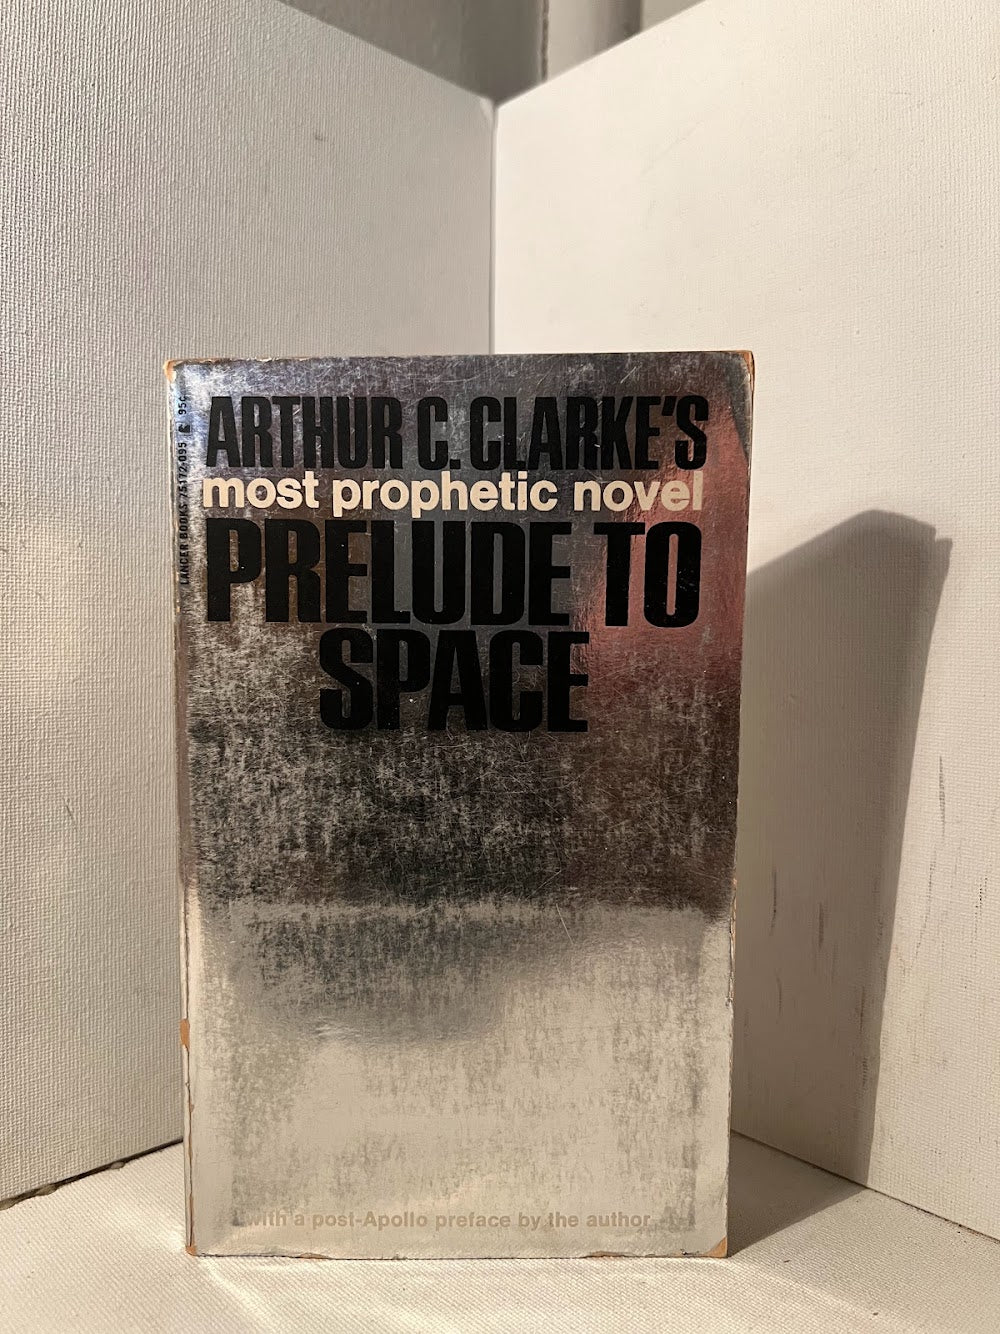 Prelude to Space by Arthur C. Clarke